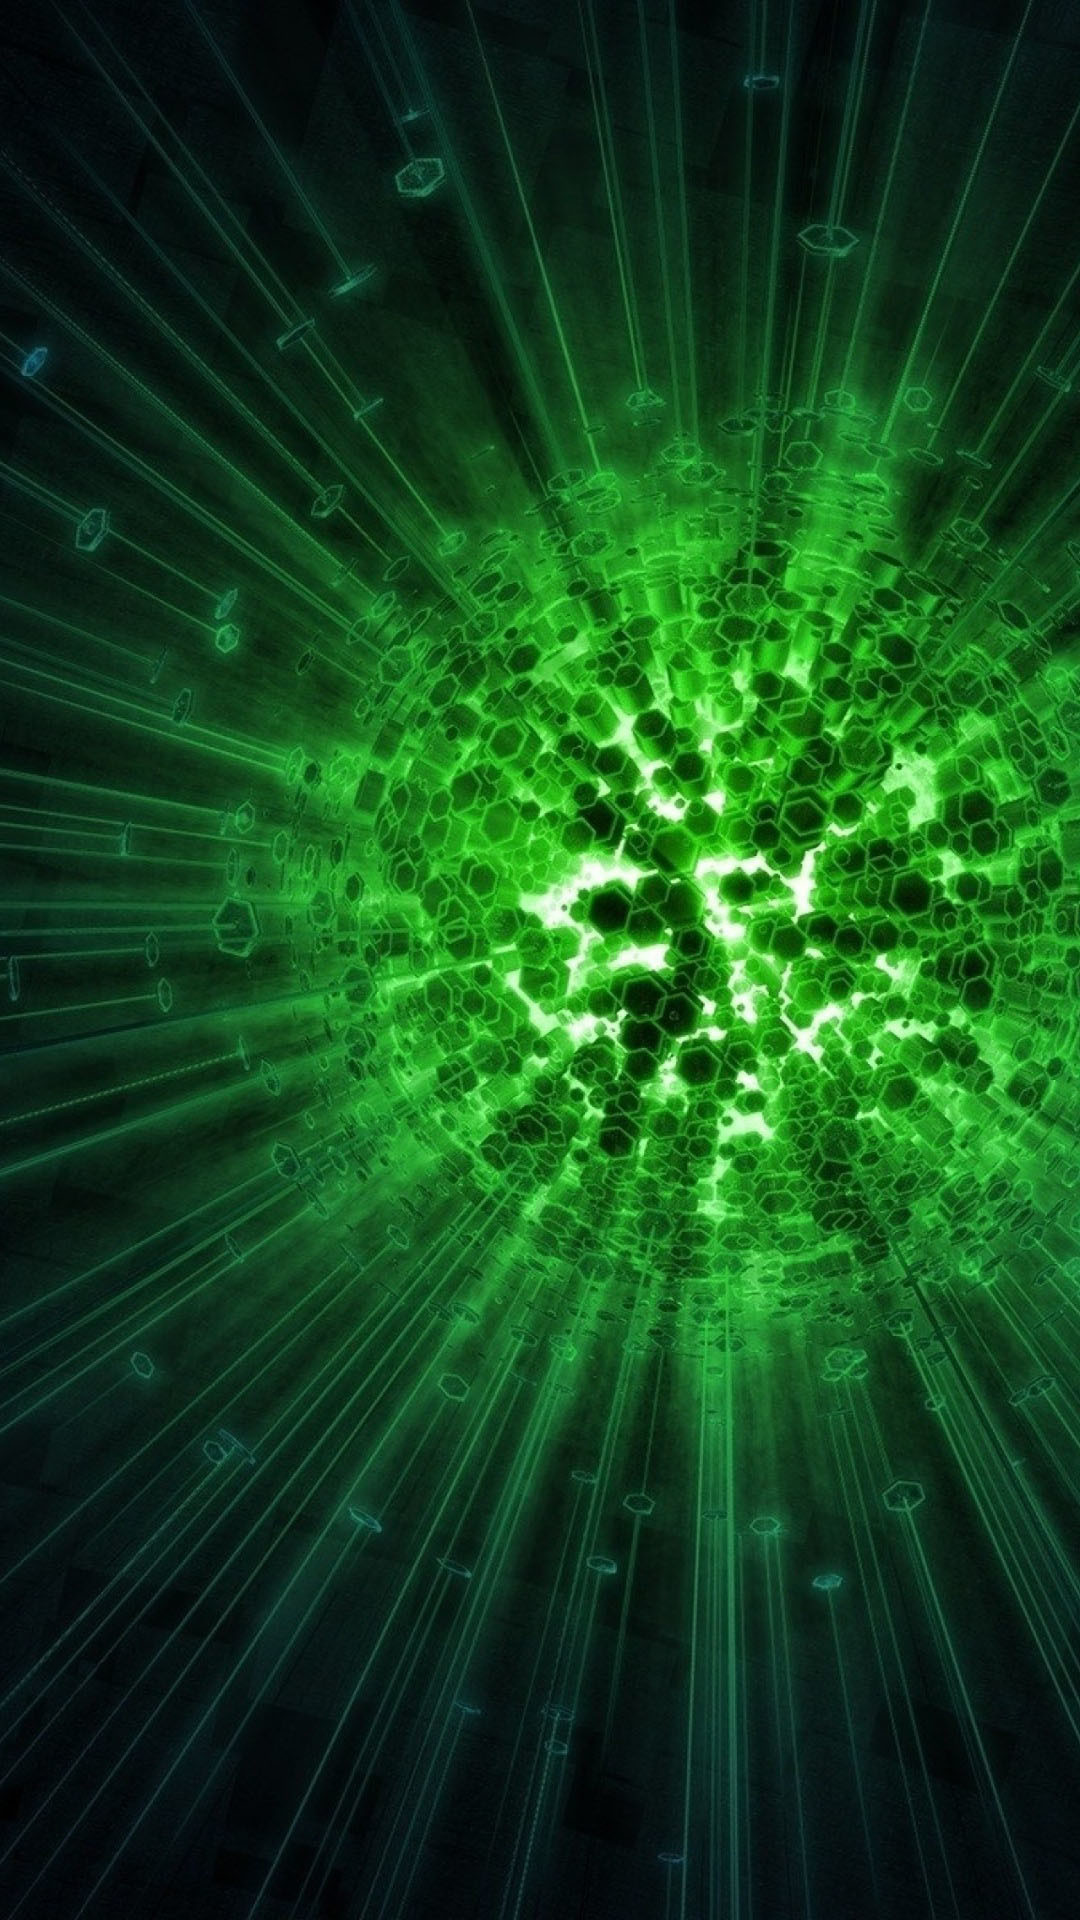 Green Nebula Live Wallpaper Android Apps on Google Play